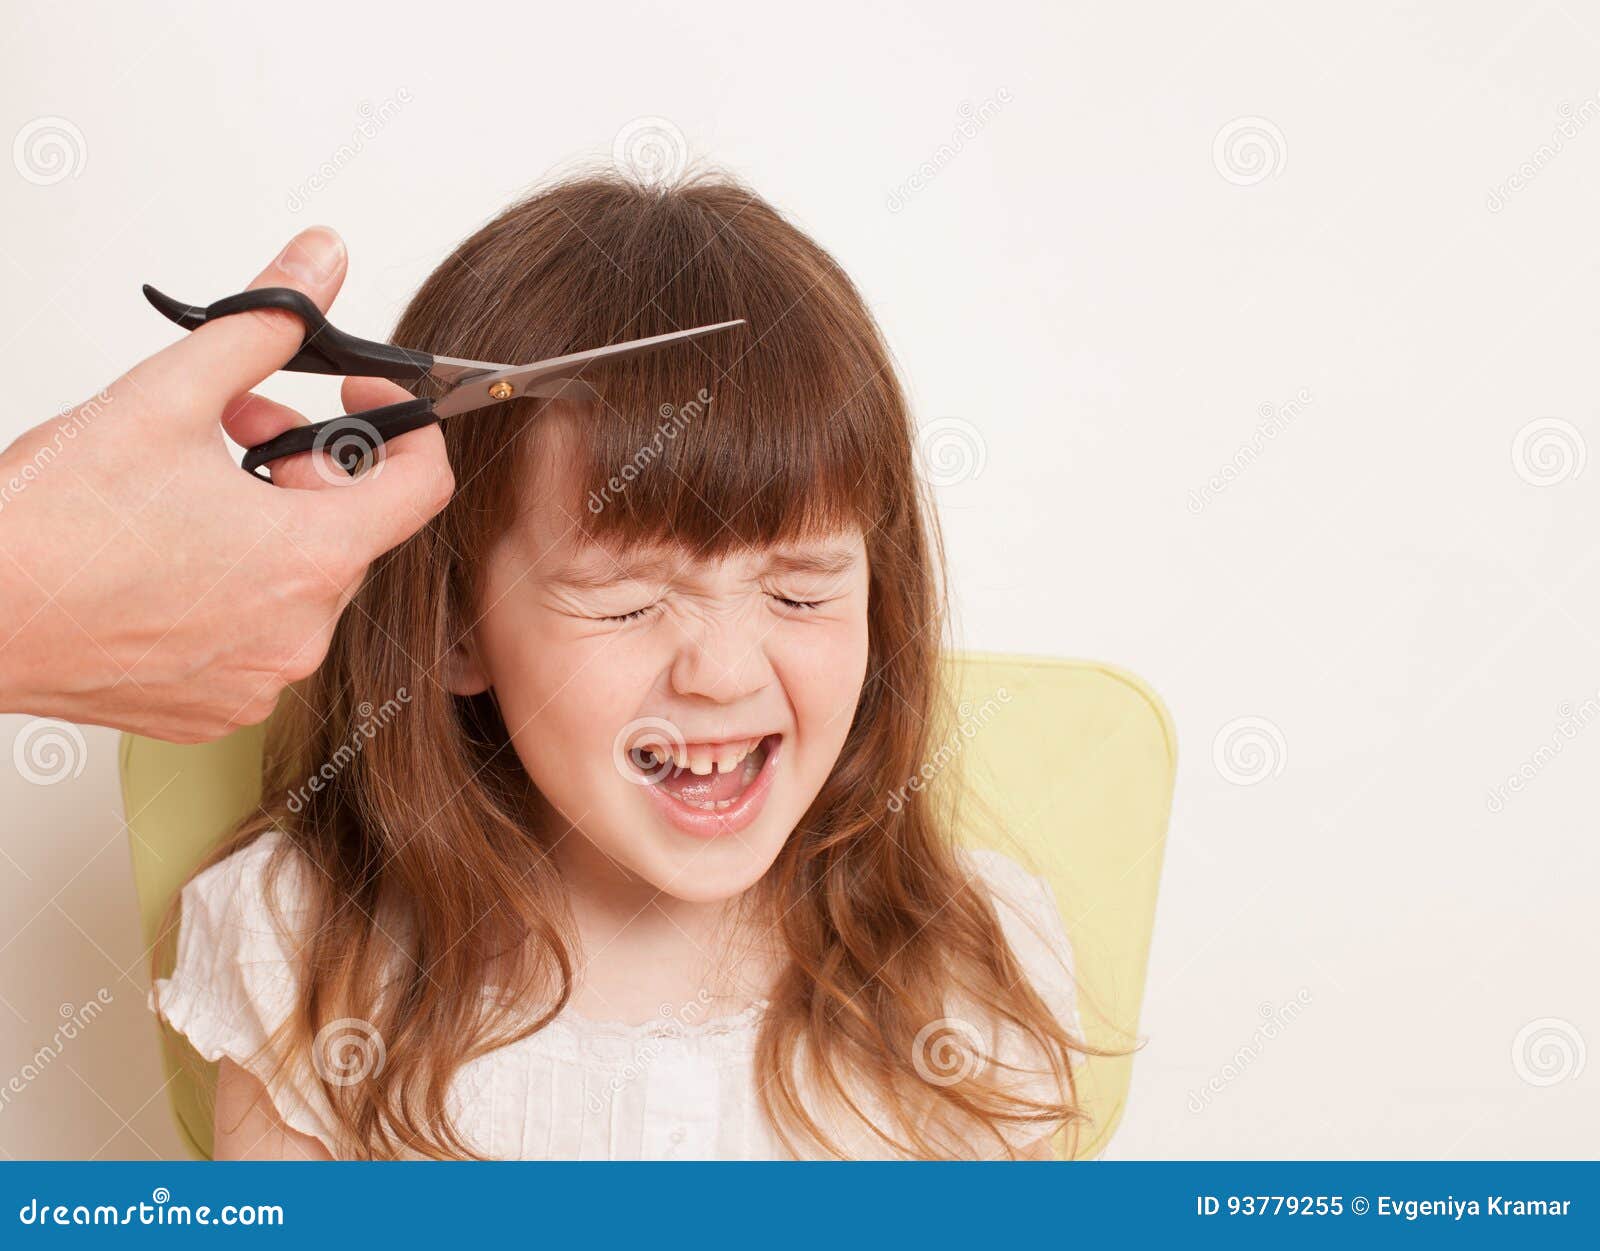 Mother Cuts Daughter`s Hair at Home Stock Image - Image of human,  expression: 93779255